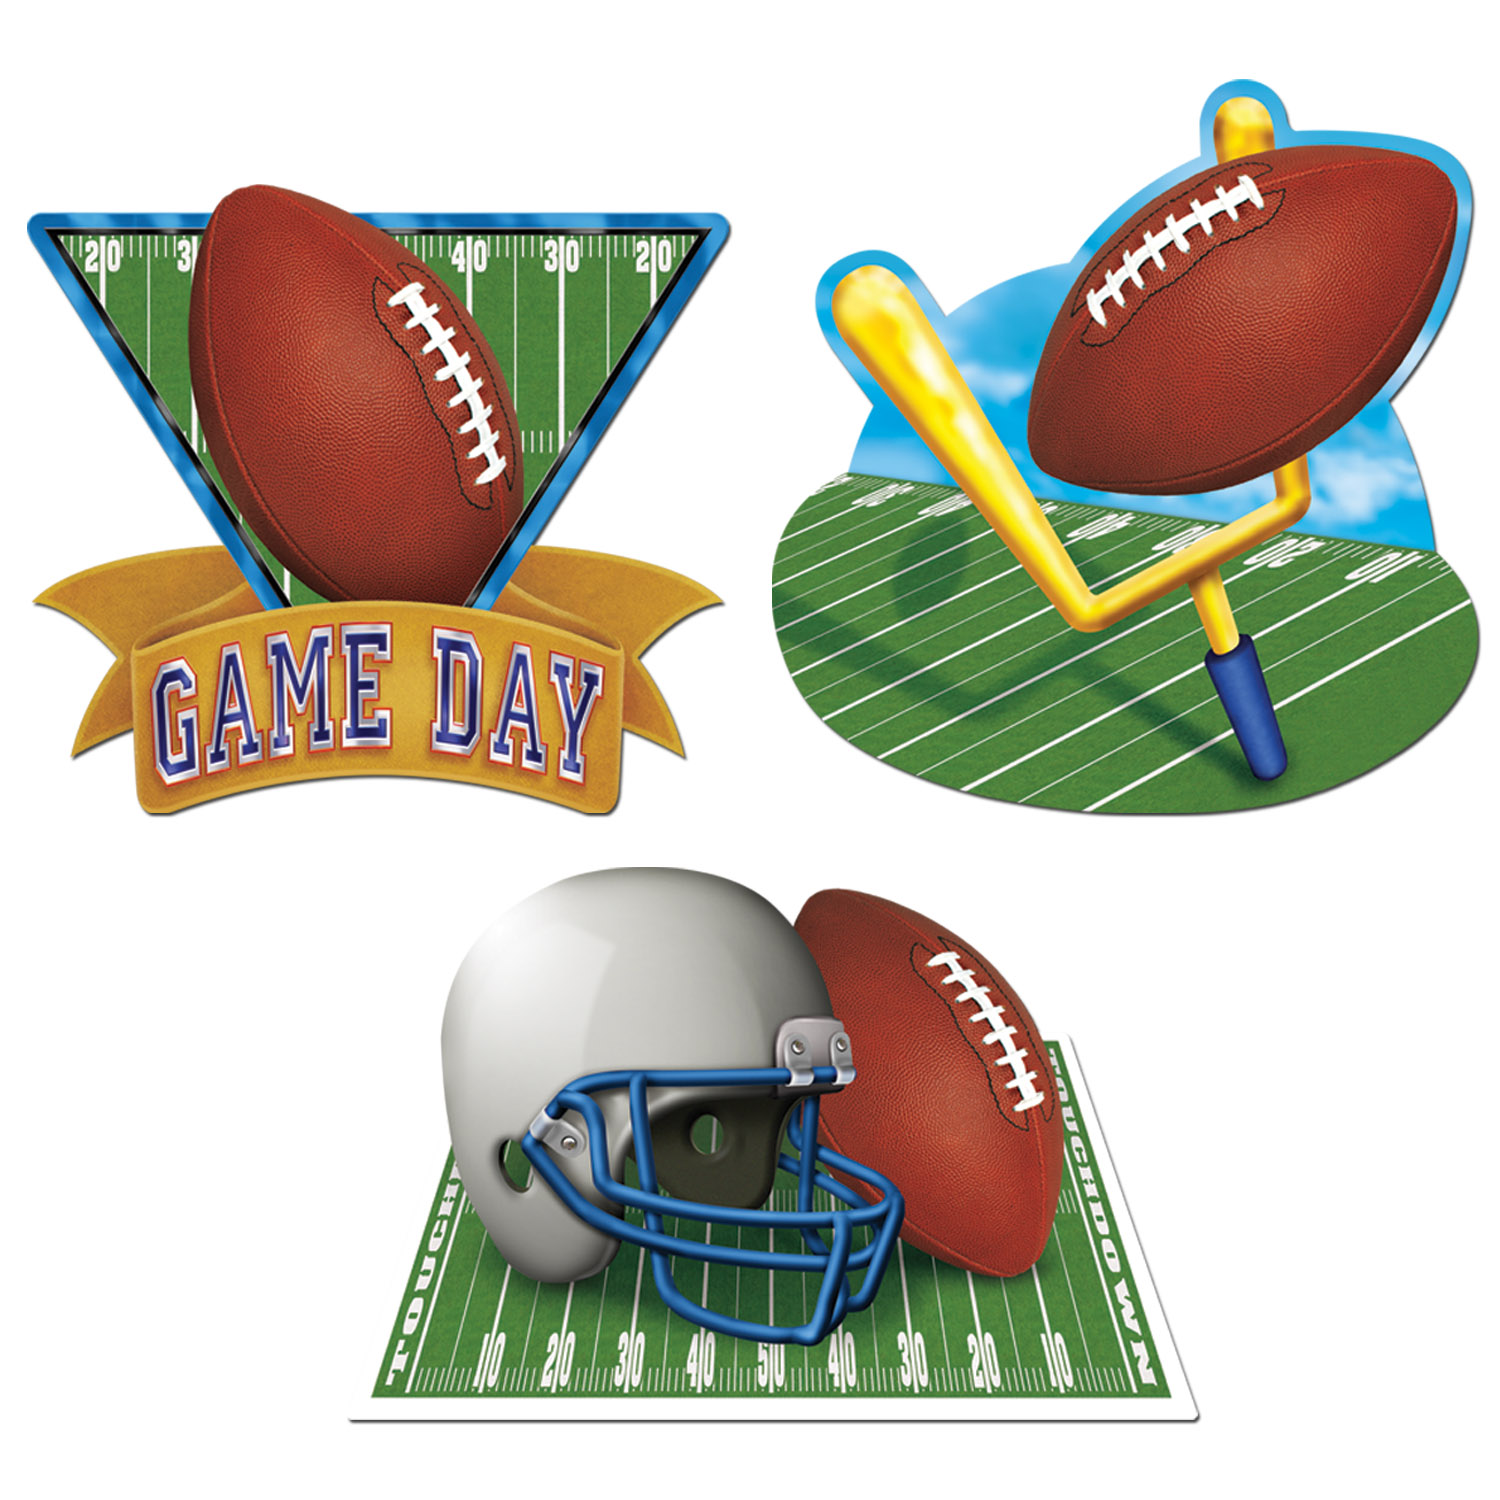 12 Pieces Game Day Football Cutouts - Hanging Decorations & Cut Out